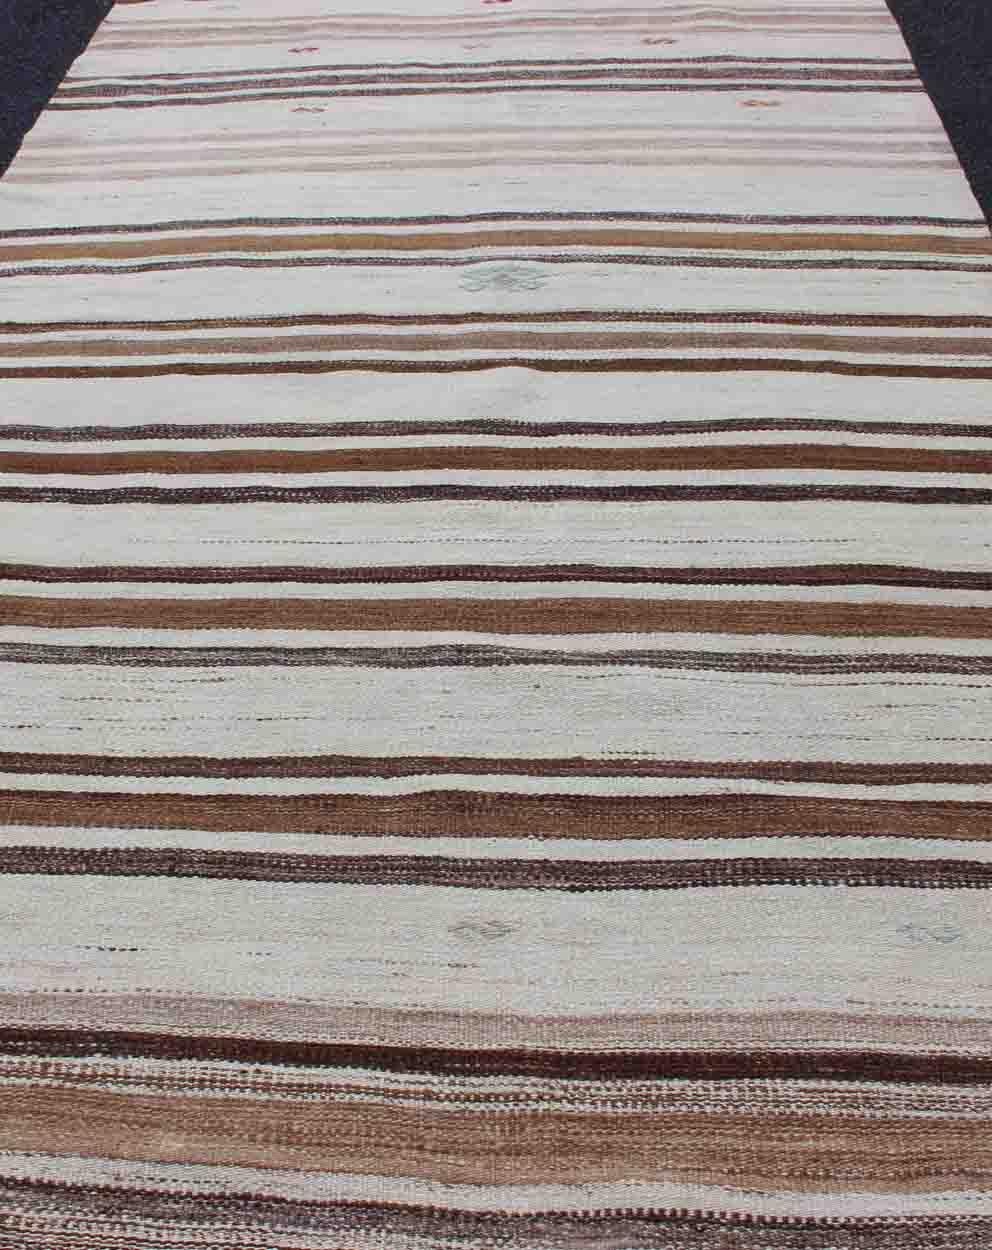 Striped Turkish Vintage Kilim Flat-Weave Rug in Shades of Browns Taupe and Ivory For Sale 1